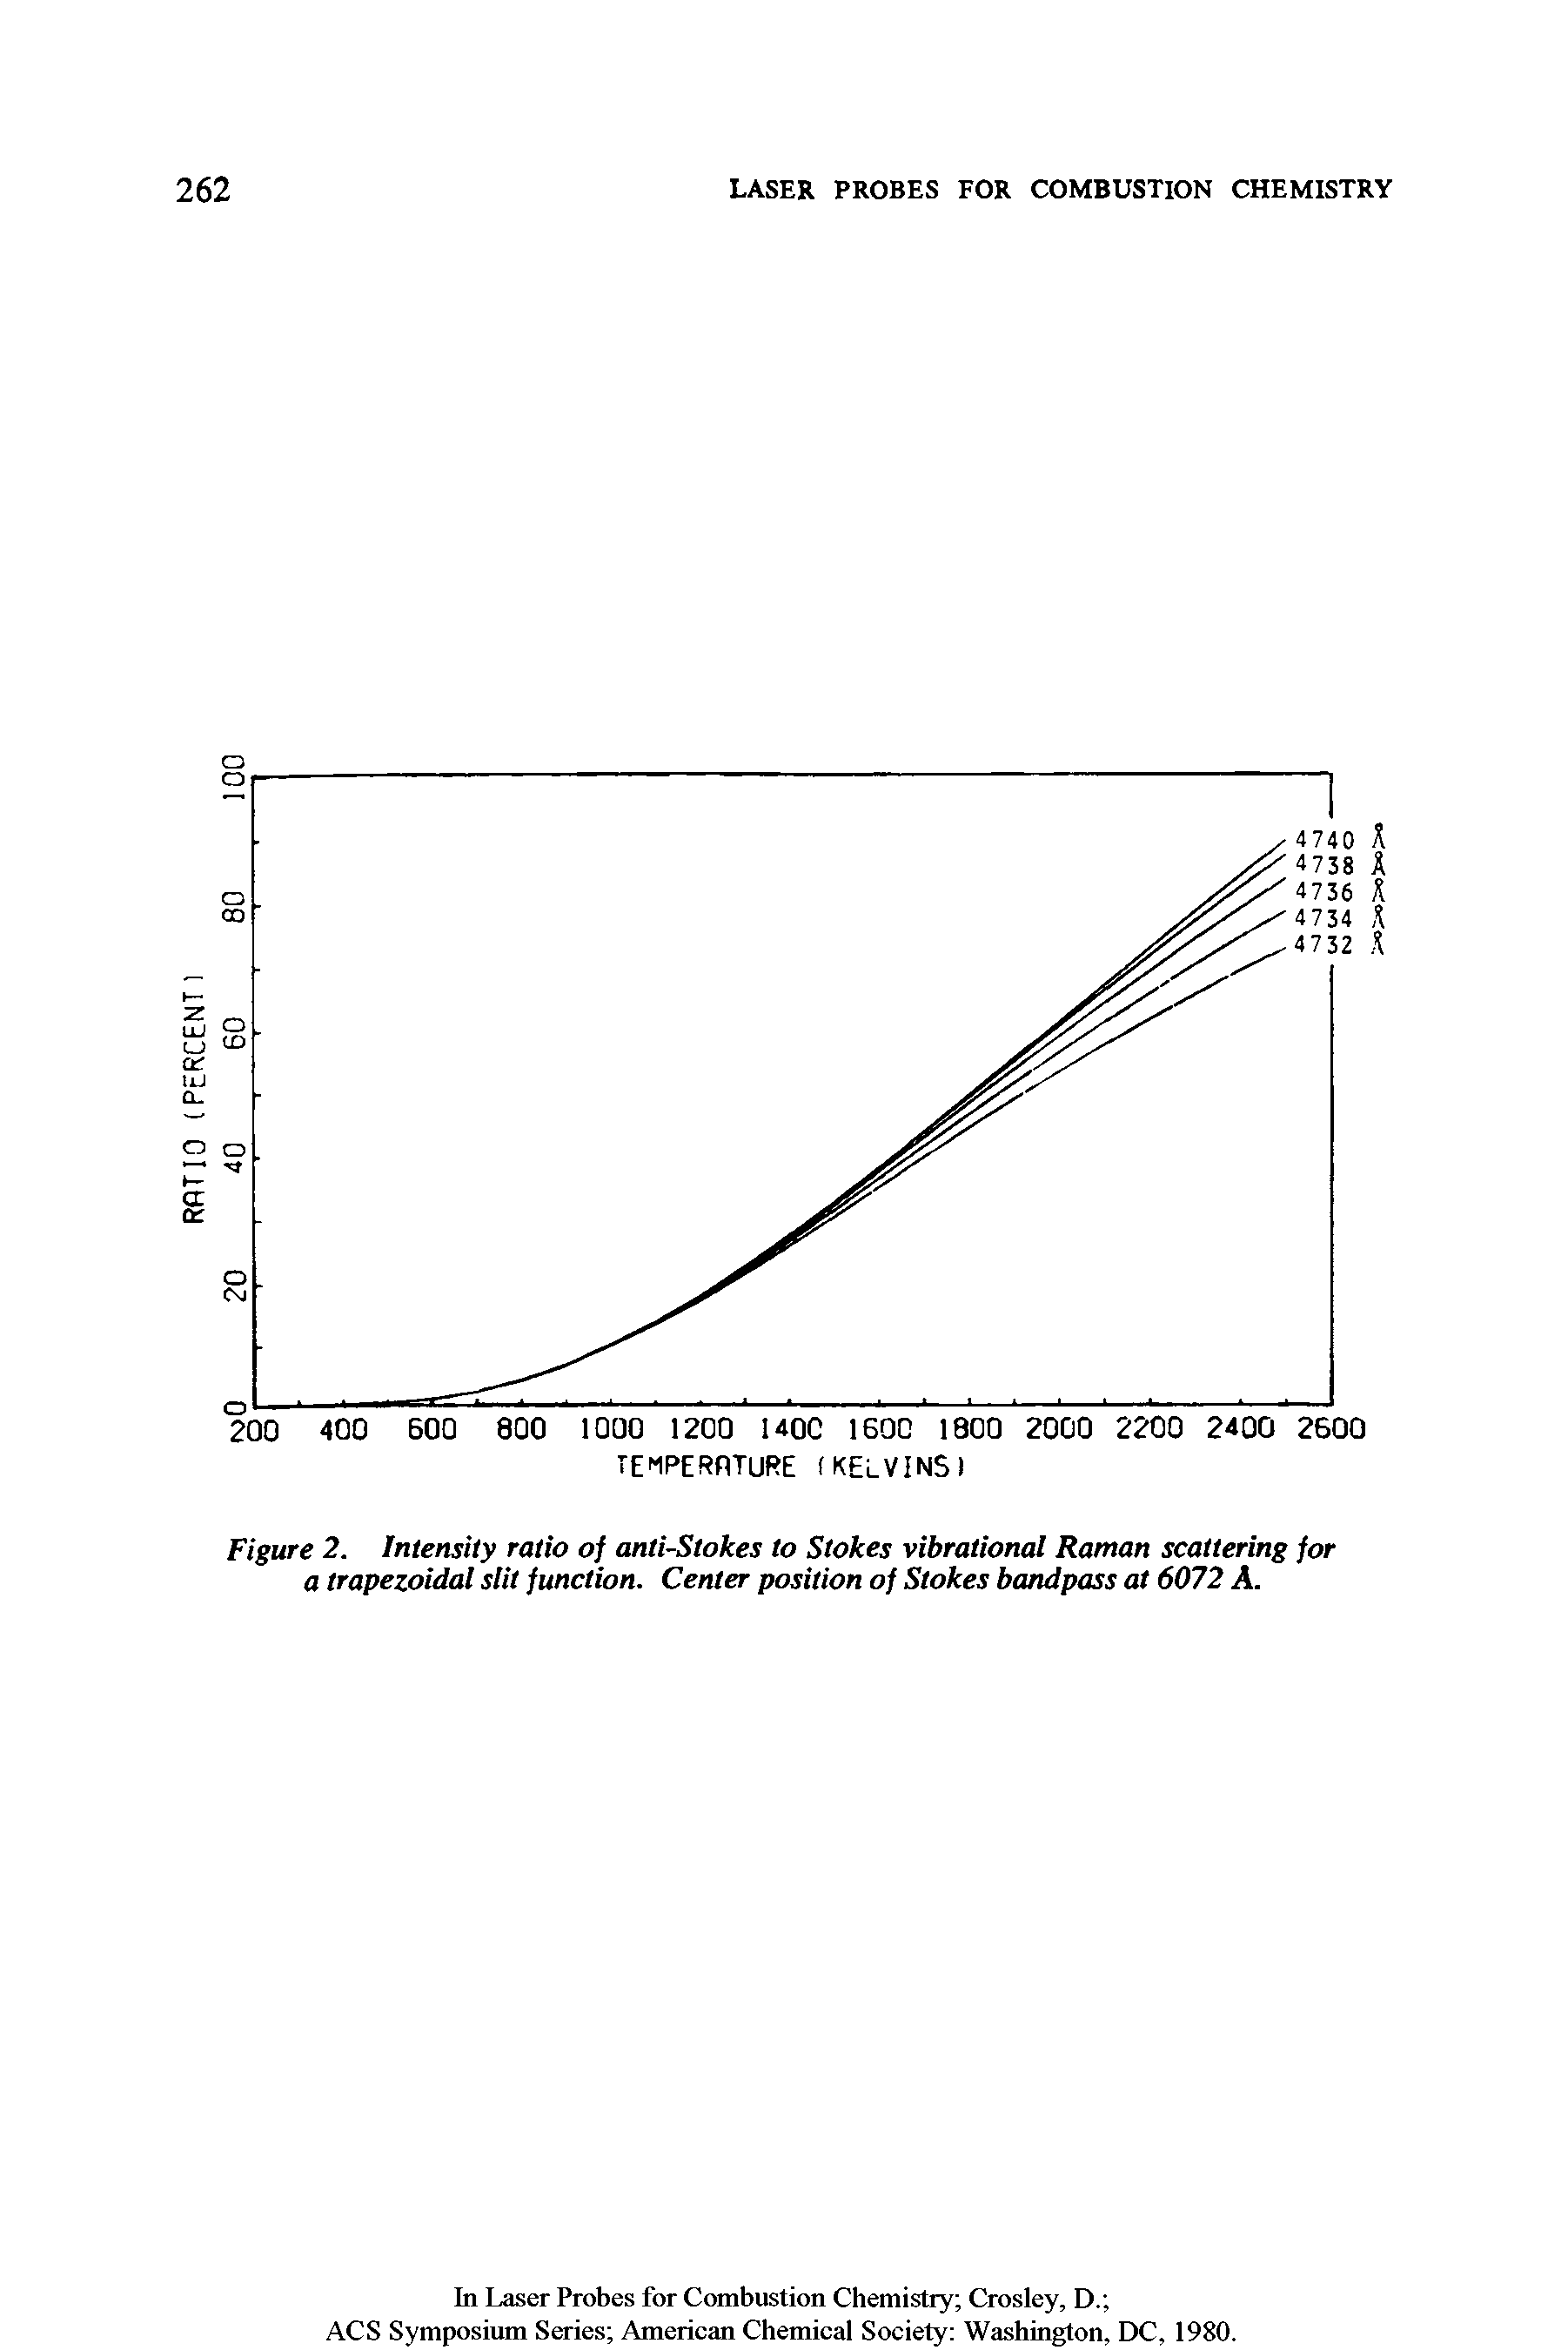 Figure 2. Intensity ratio of anti-Stokes to Stokes vibrational Raman scattering for a trapezoidal slit function. Center position of Stokes bandpass at 6072 A.